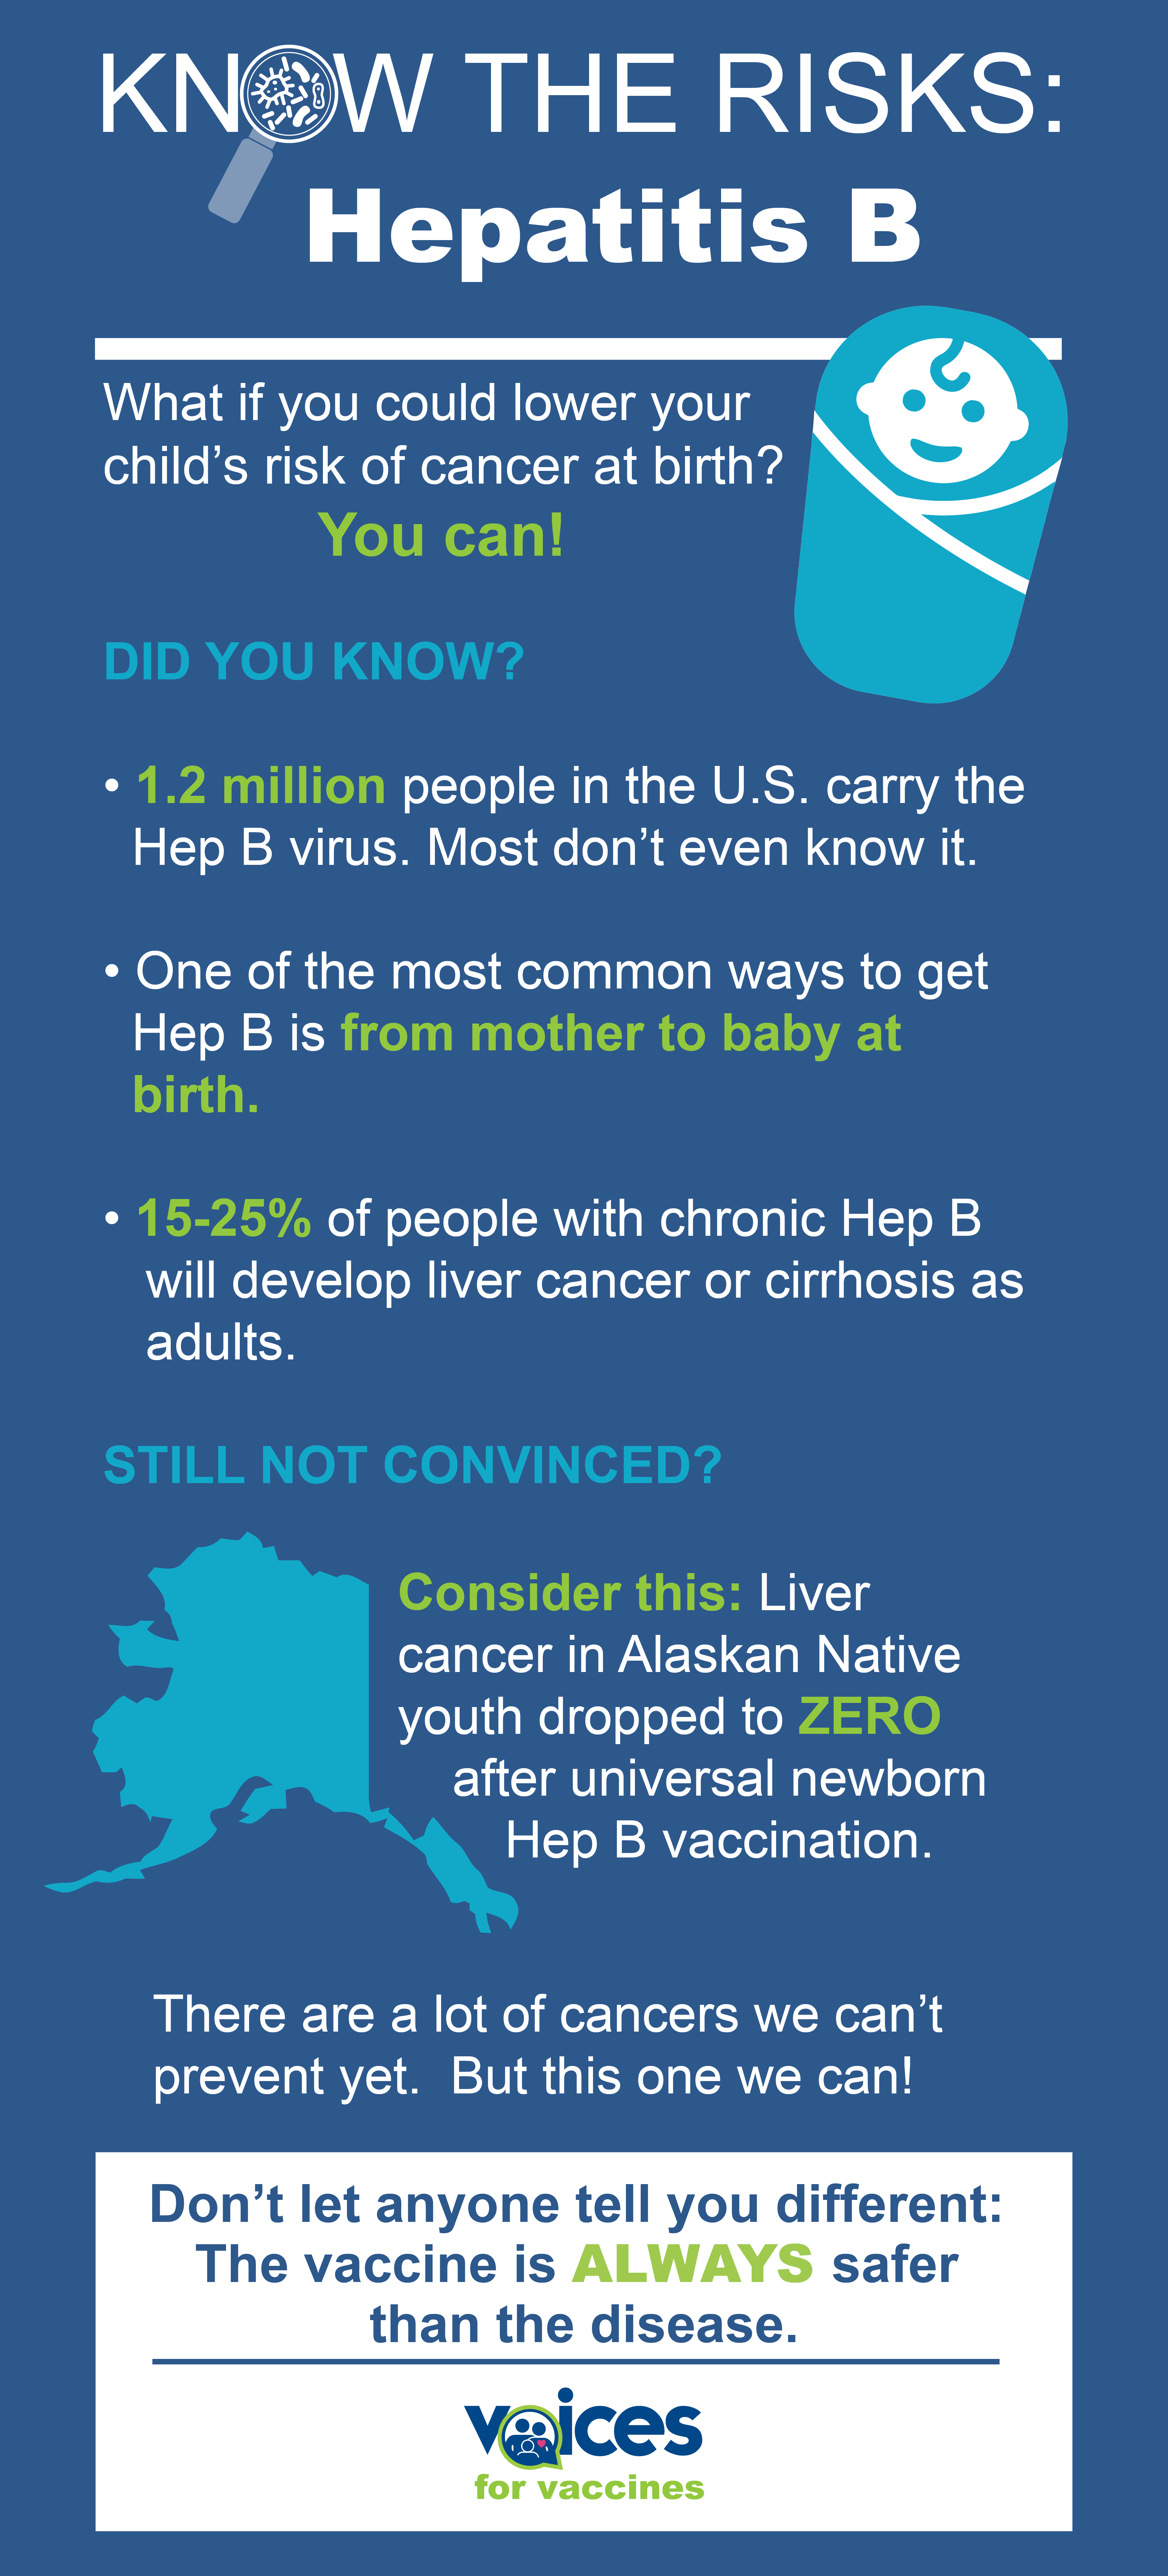 What if you could lower your child’s risk of cancer at birth? You can! Did you know that 1.2 million people in the U.S. carry the Hep B virus? Most don’t even know it. One of the most common ways to get Hep B is from mother to baby at birth. 15-25% of people with chronic Hep B will develop liver cancer or cirrhosis as adults. Still not convinced about the importance of the Hep B vaccine? Consider this: Liver cancer in Alaskan Native youth dropped to ZERO after universal newborn Hep B vaccination. There are a lot of cancers we can’t prevent yet. But this one we can. Protect your child!